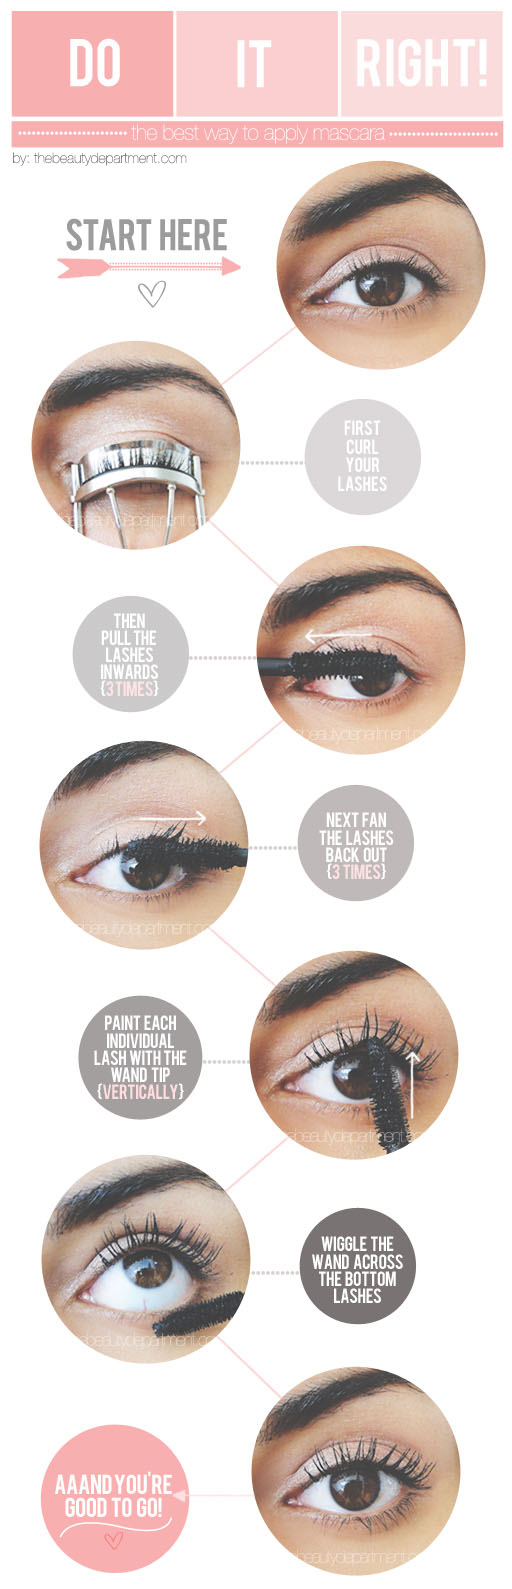 HOW TO GET THE MOST FROM MASCARA